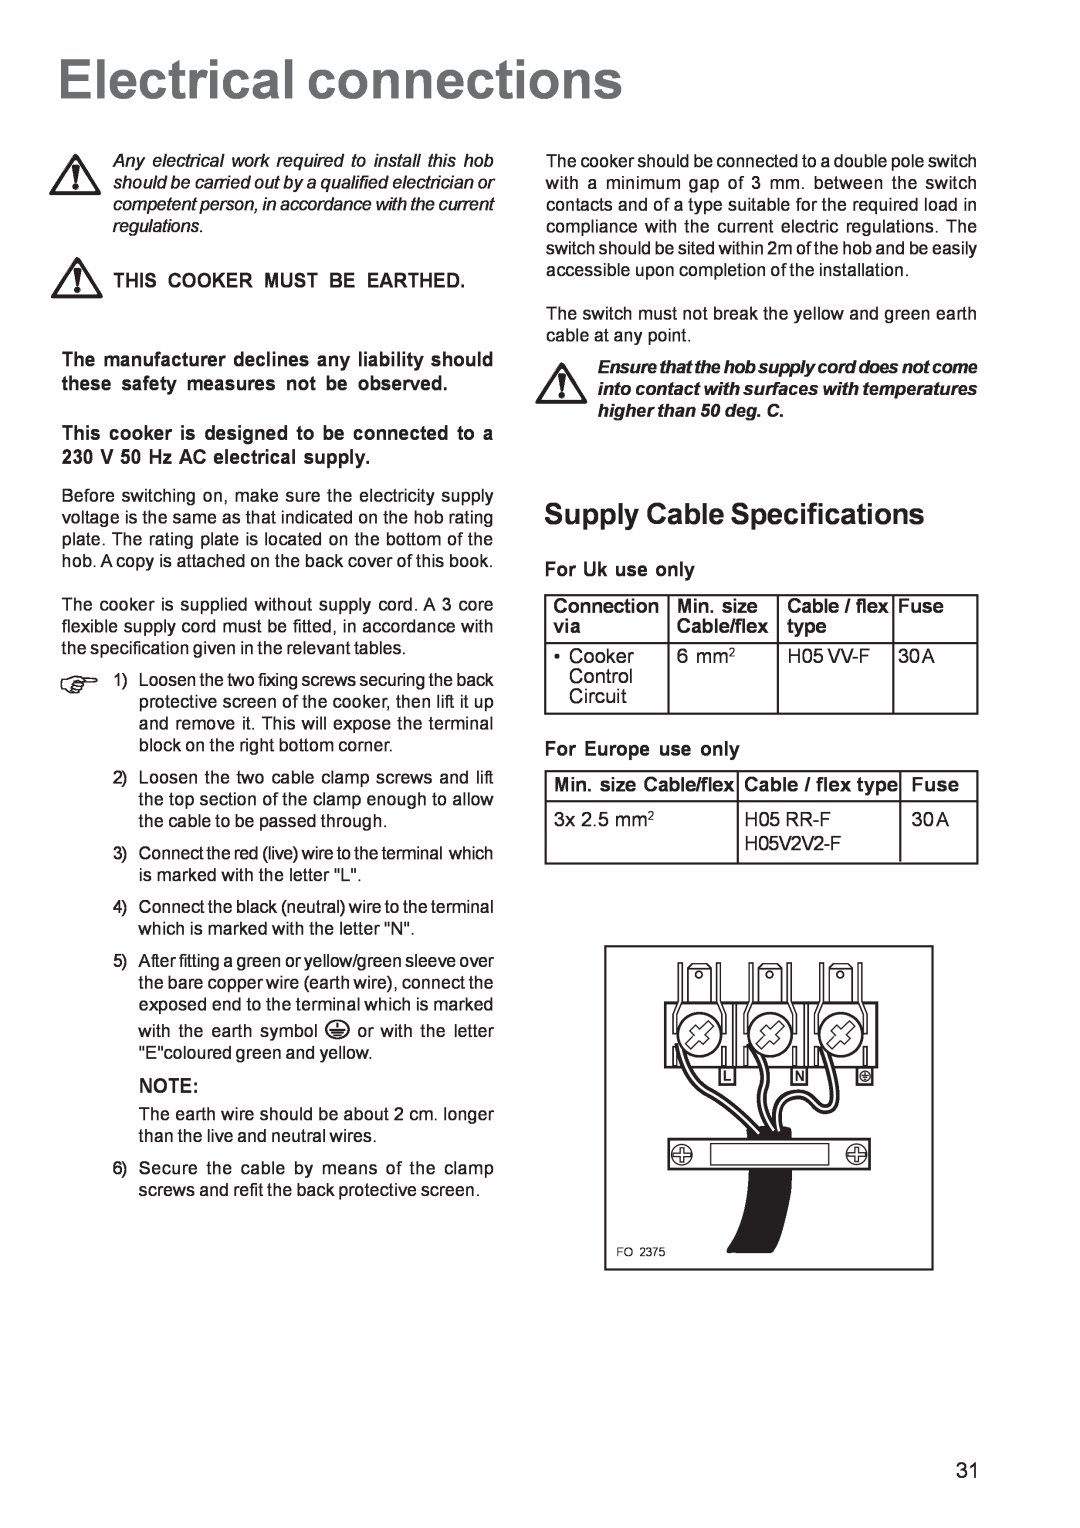 Zanussi ZCE 651 manual Electrical connections, Supply Cable Specifications, Cooker, 6 mm2, H05 VV-F, 30 A, Control, Circuit 